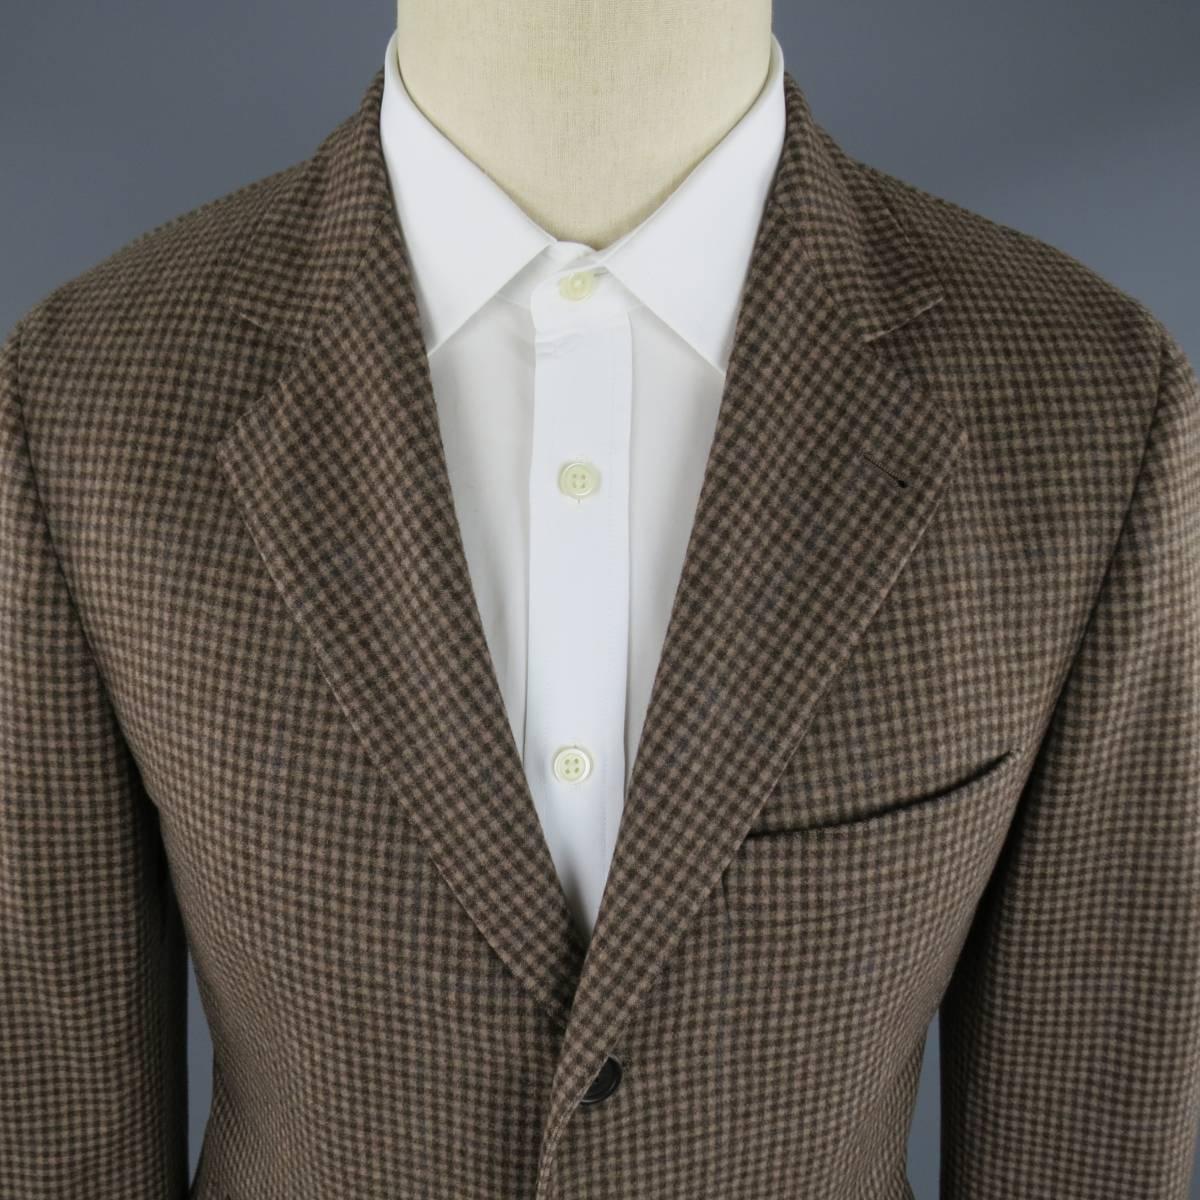 BRUNELLO CUCINELLI Sport Coat consists of wool material in a tan color tone. Designed in a 3 button front, notch lapel collar with 4 button cuff sleeves. Detailed checkered pattern, top pocket square and bottom flap pockets. Double back vent and